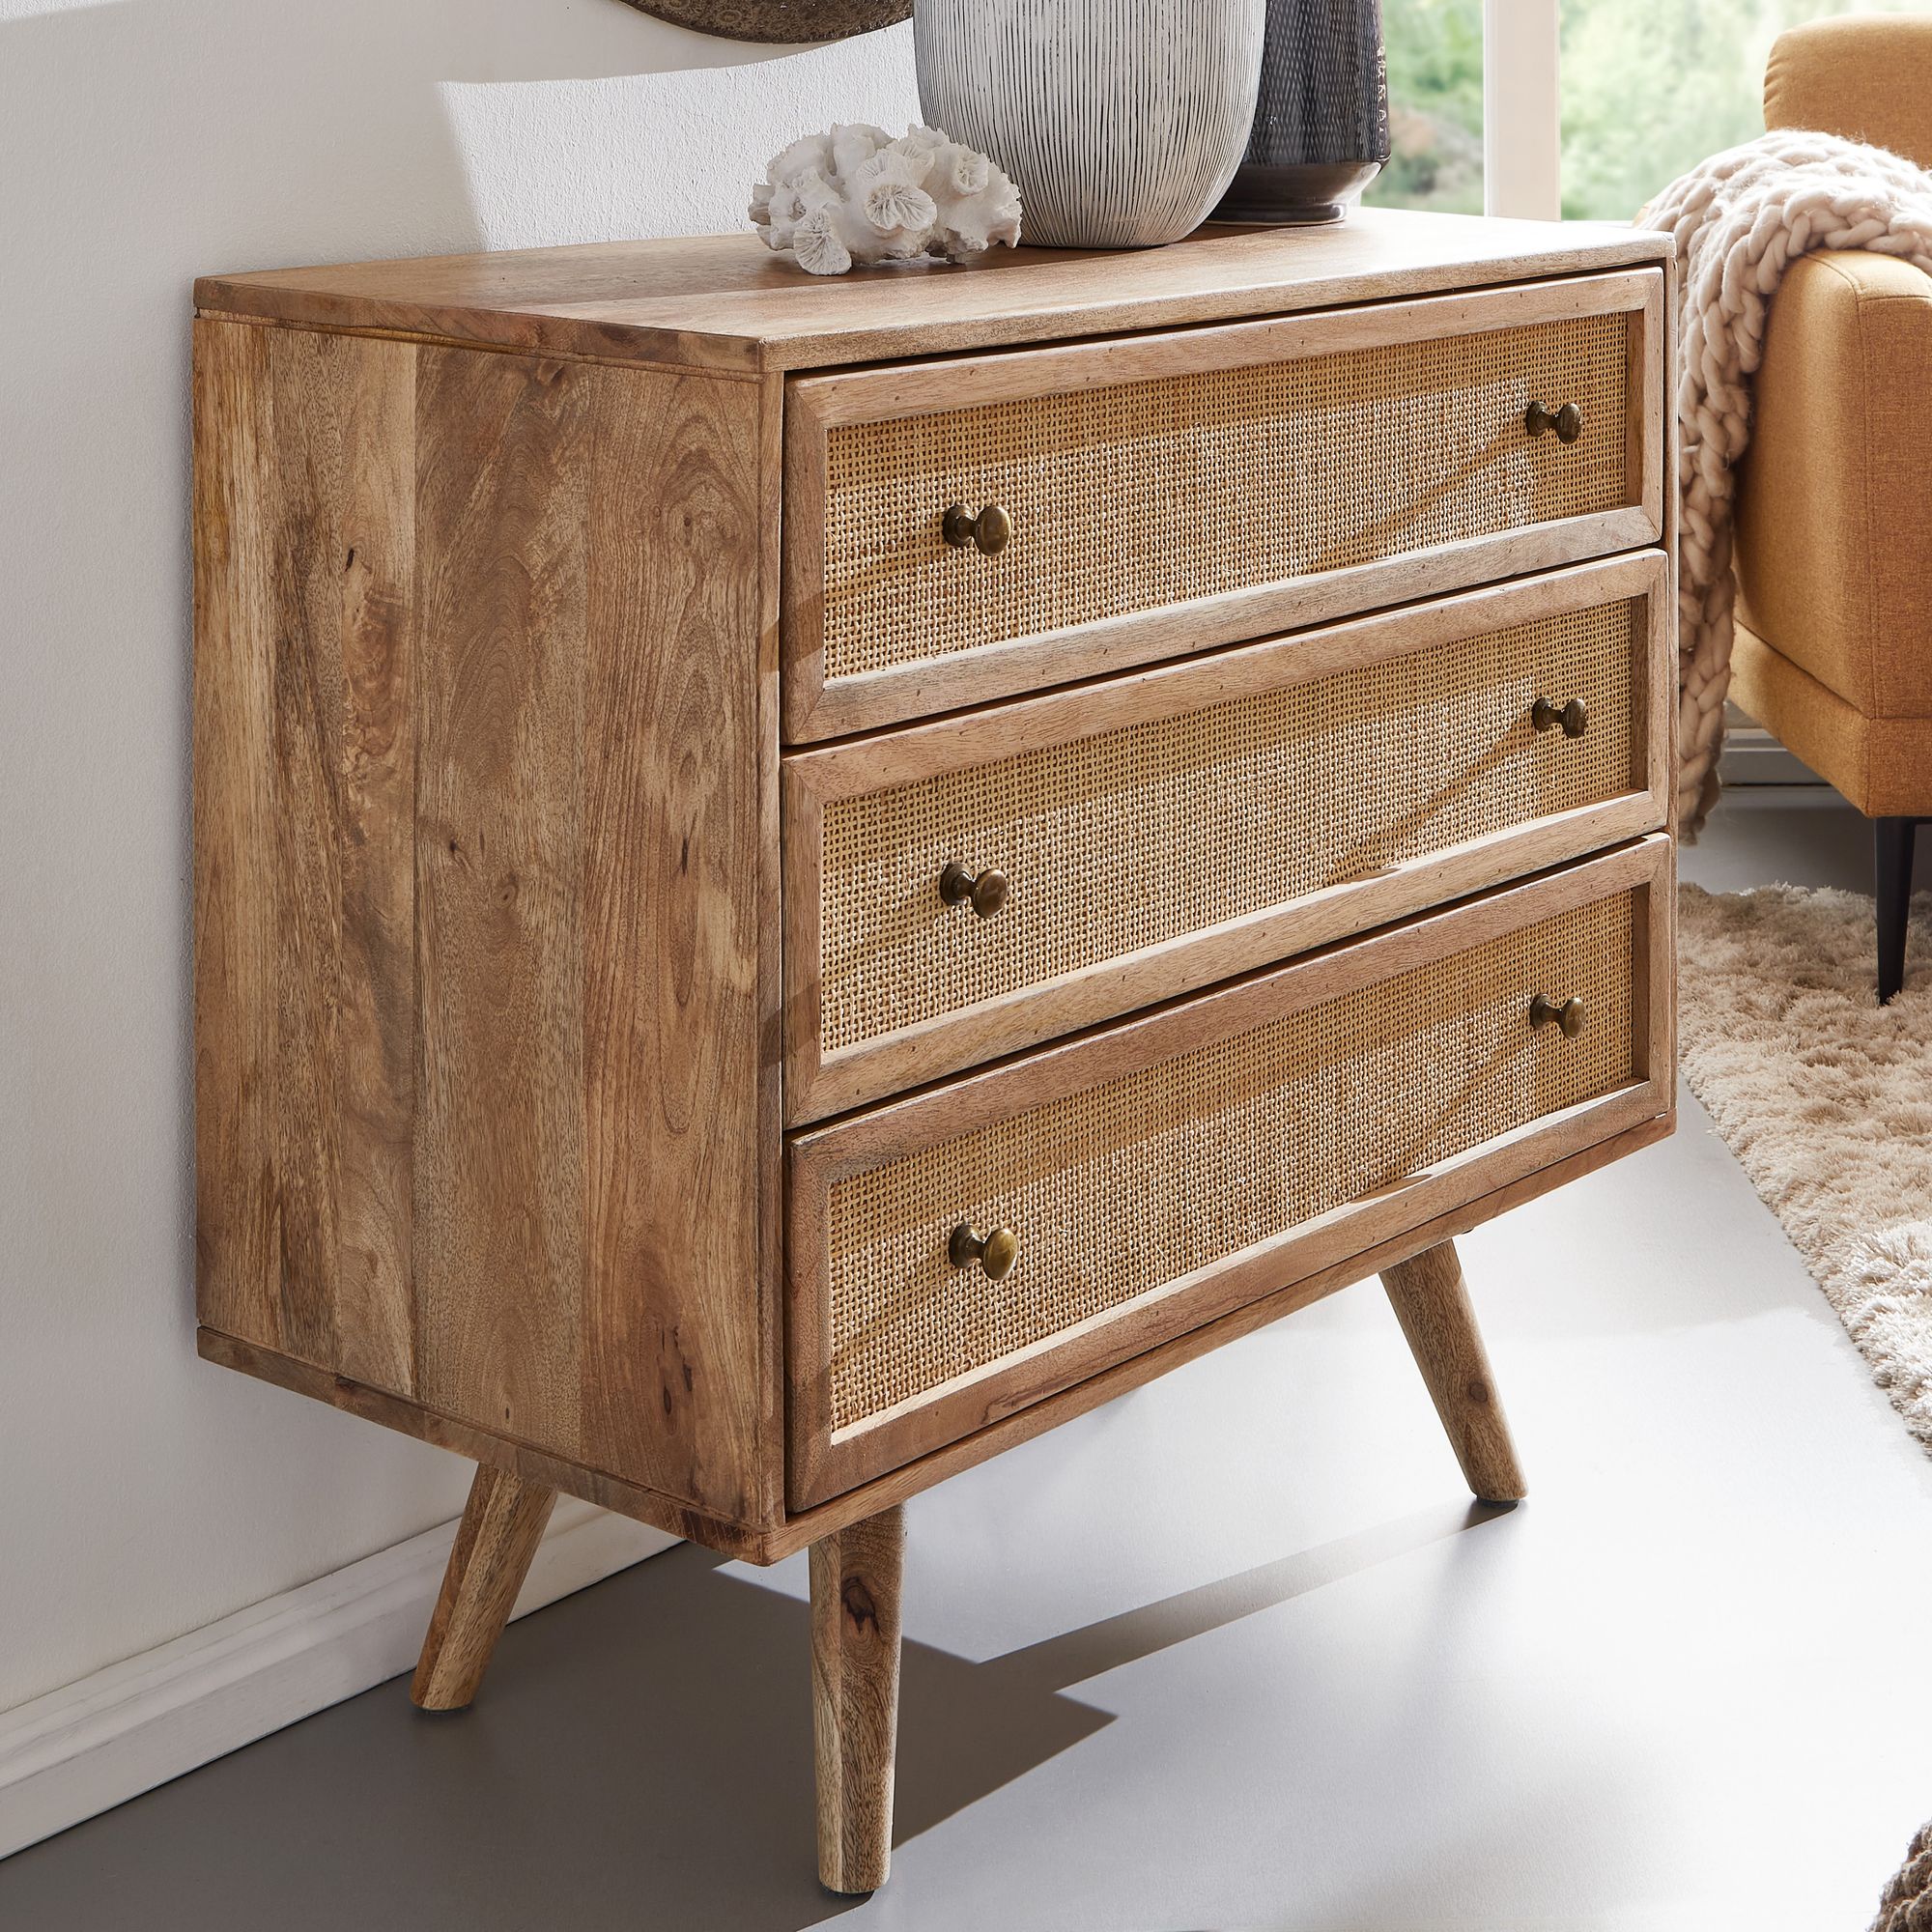 Nancy's Newton Sideboard - Solid Mango Wood - Handmade - Chest of Drawers - Wooden Cabinet - 80 x 75 x 40 cm - Brown - Industrial